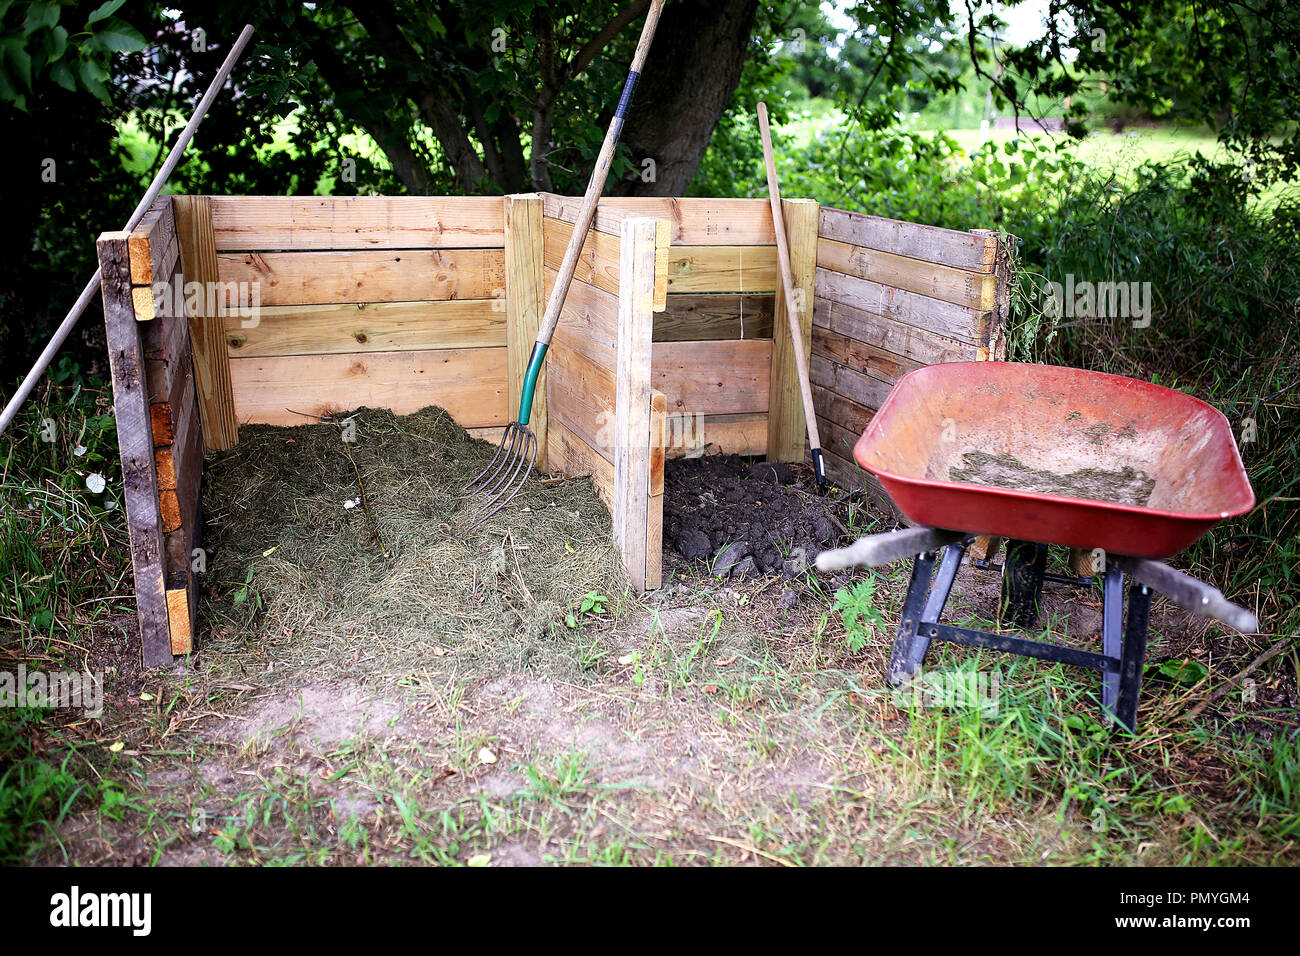 A homemade wooden 2 stage compost bin is constructed in a home garden, with a wheelbarrow and pitchfork sitting close by. Stock Photo